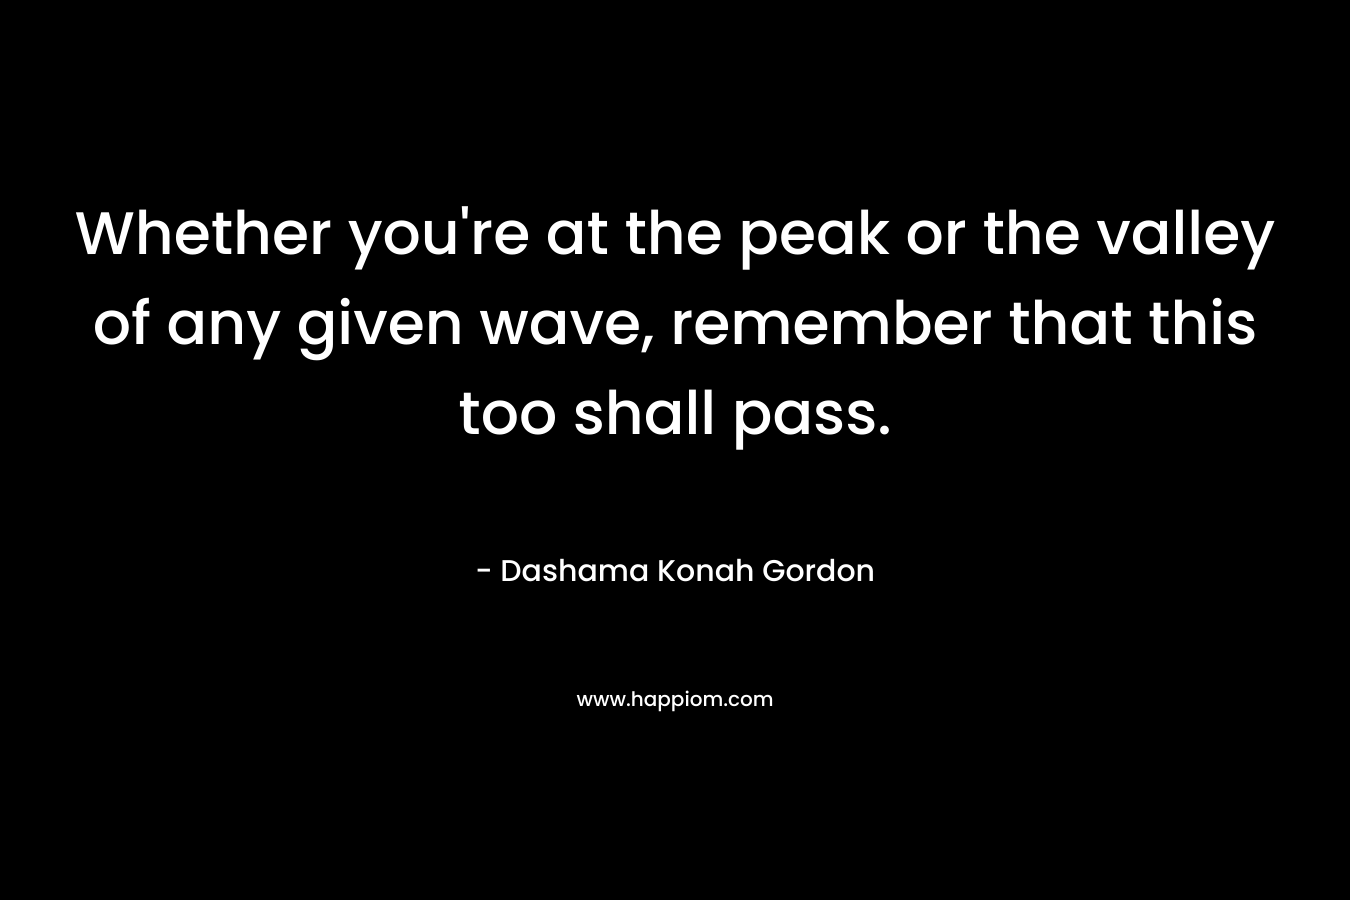 Whether you’re at the peak or the valley of any given wave, remember that this too shall pass. – Dashama Konah Gordon